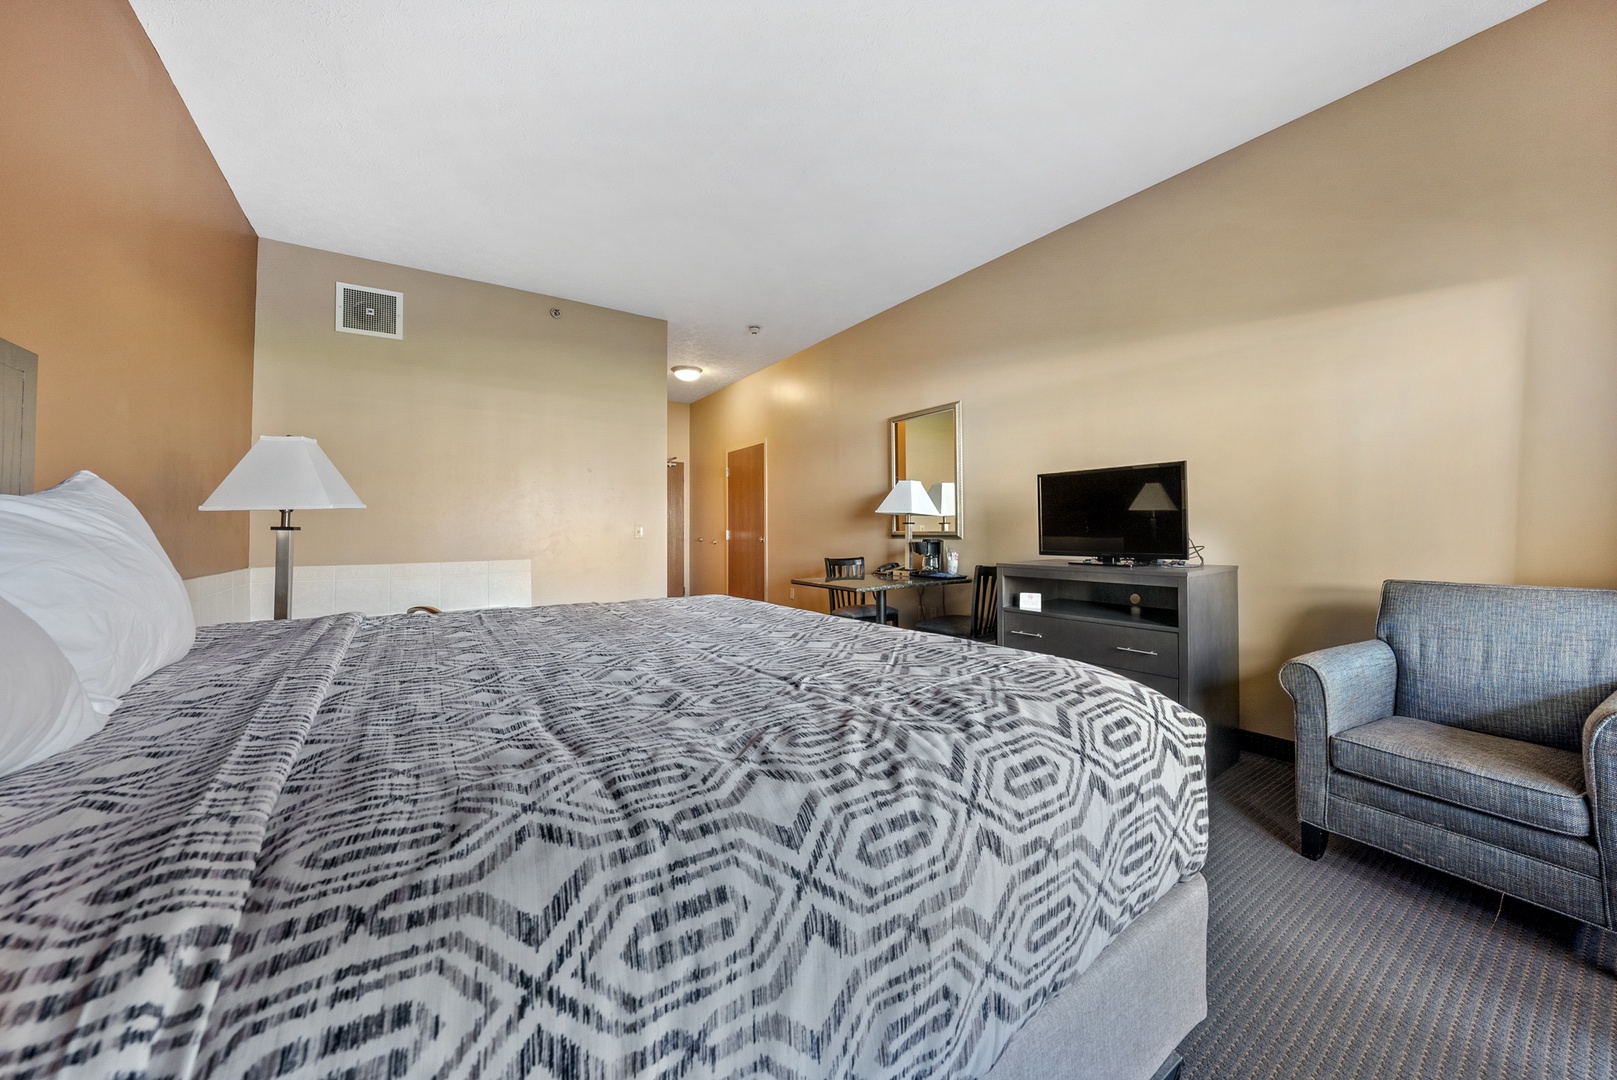 Experience ultimate comfort in our King room with Jacuzzi